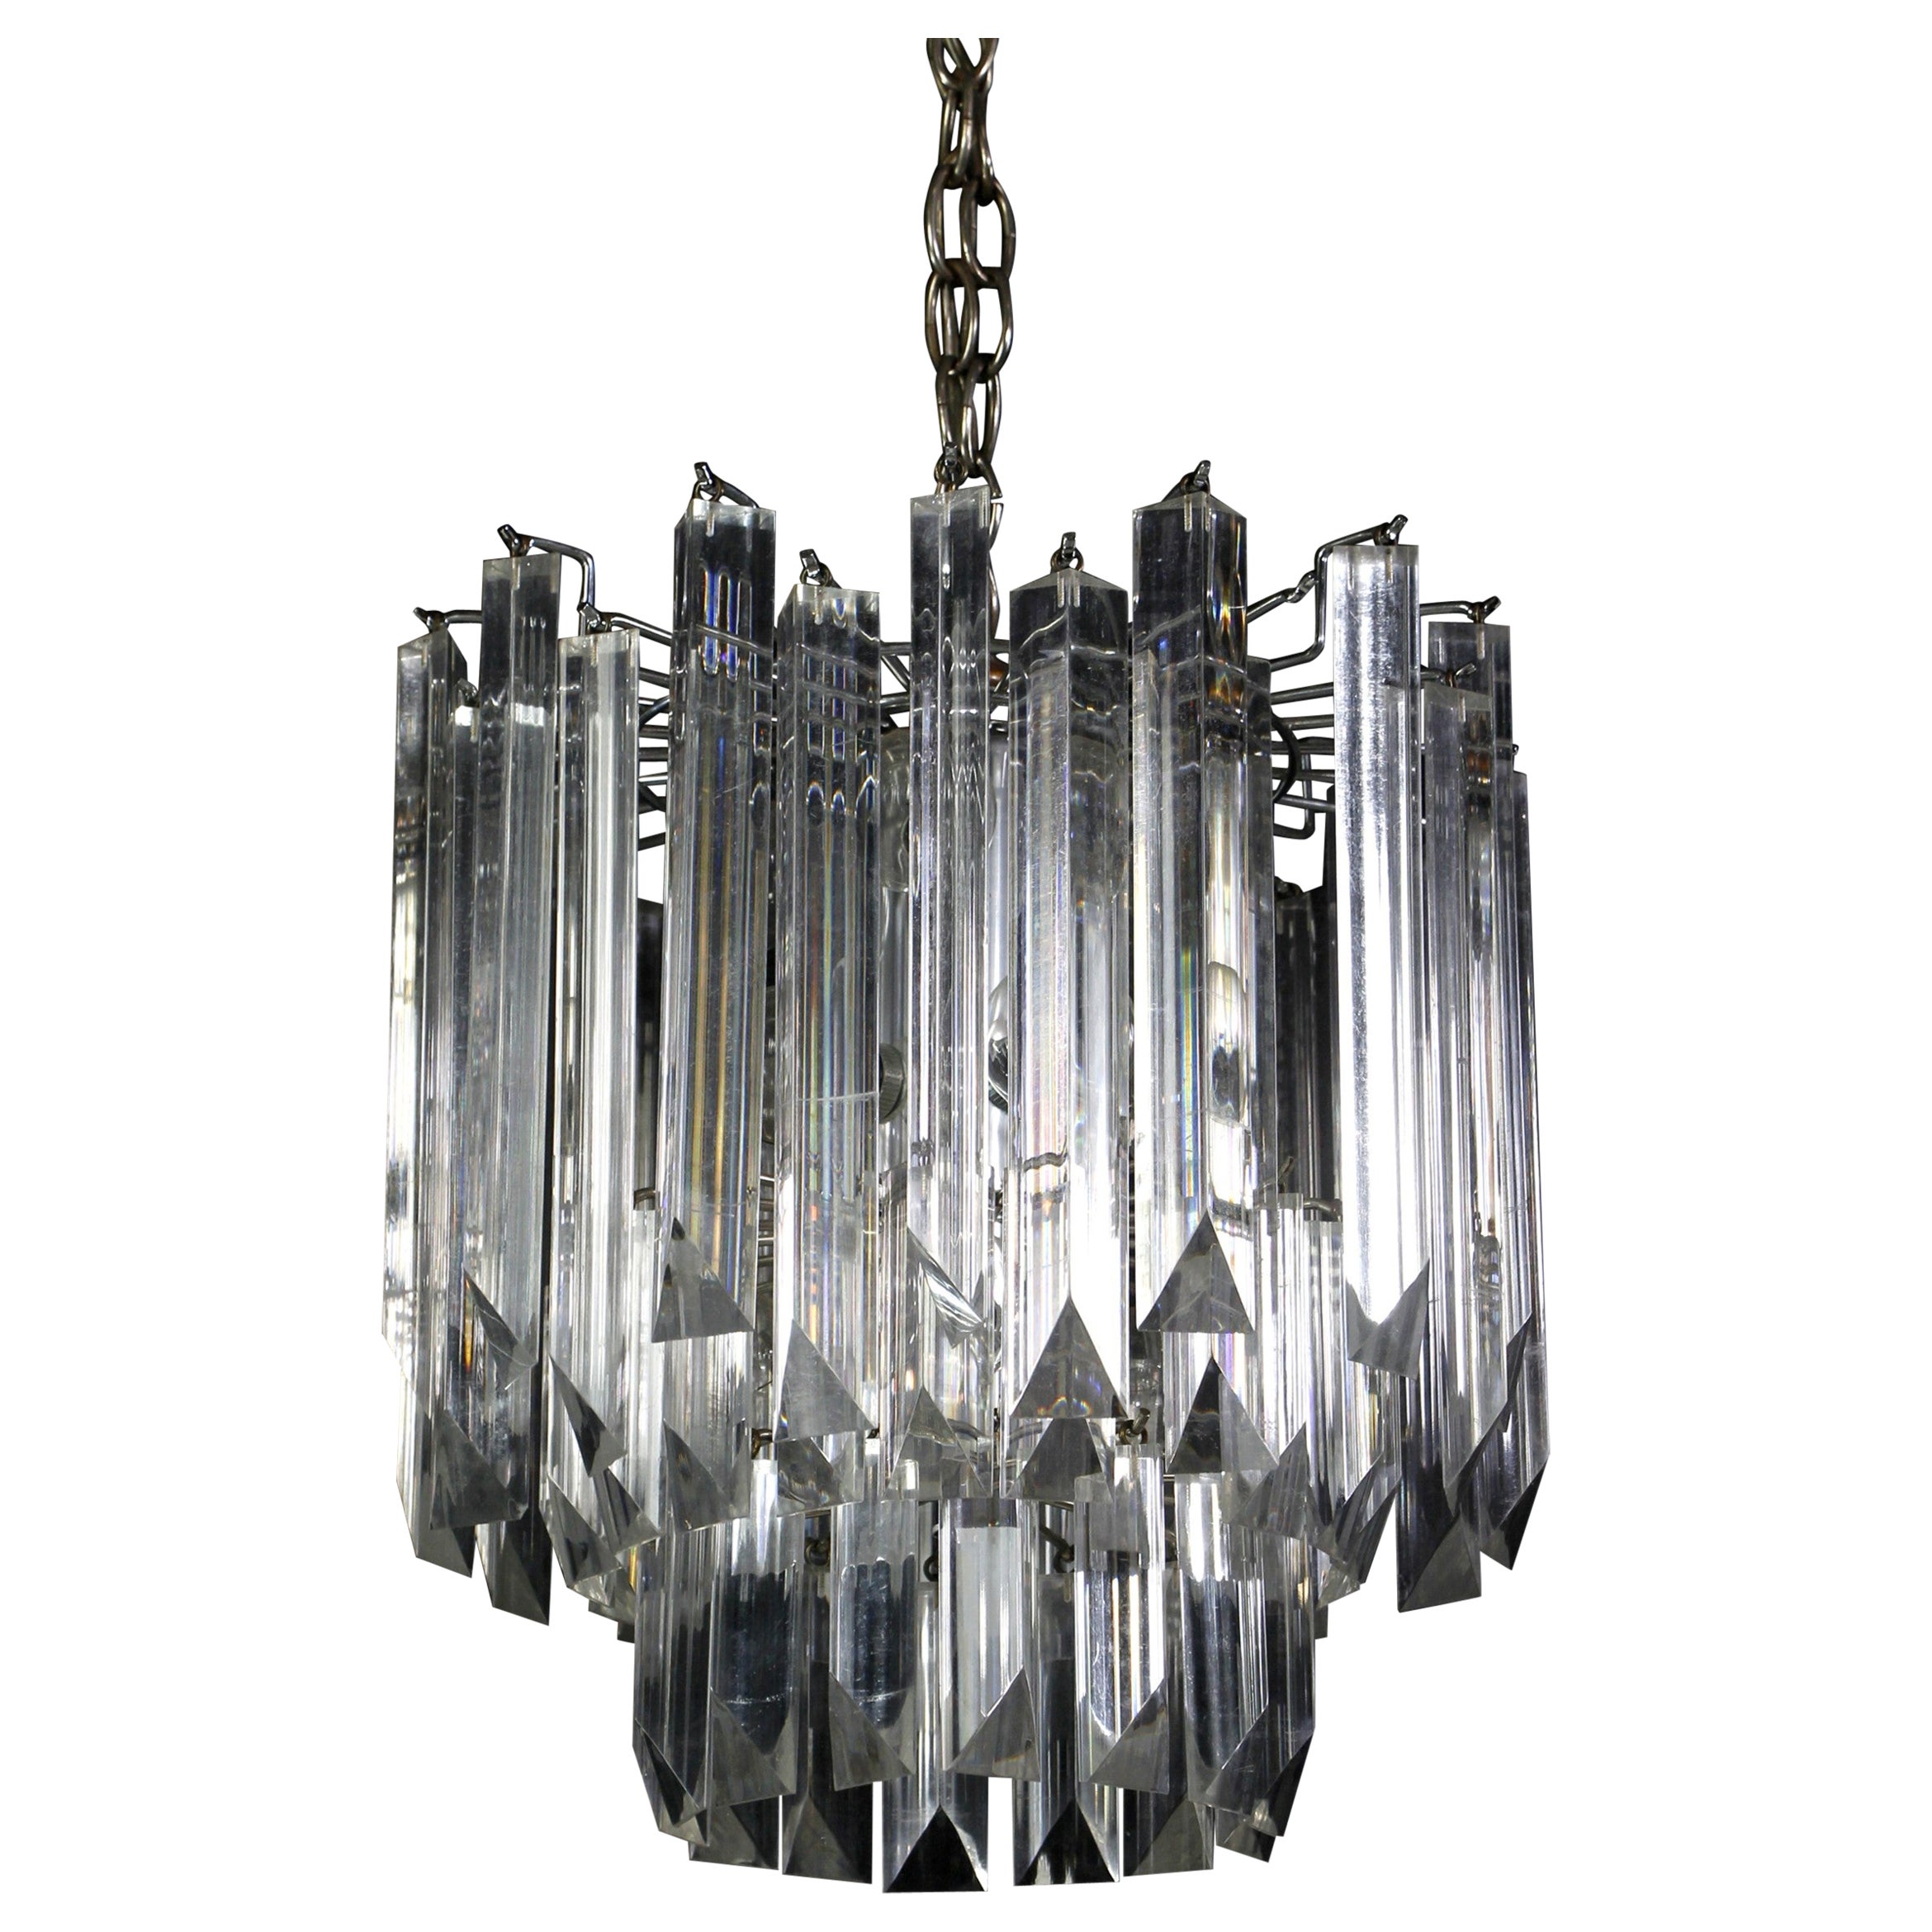 1970s Mid-Century Modern Clear Lucite 3-Tier Prism Chandelier with Chrome Frame